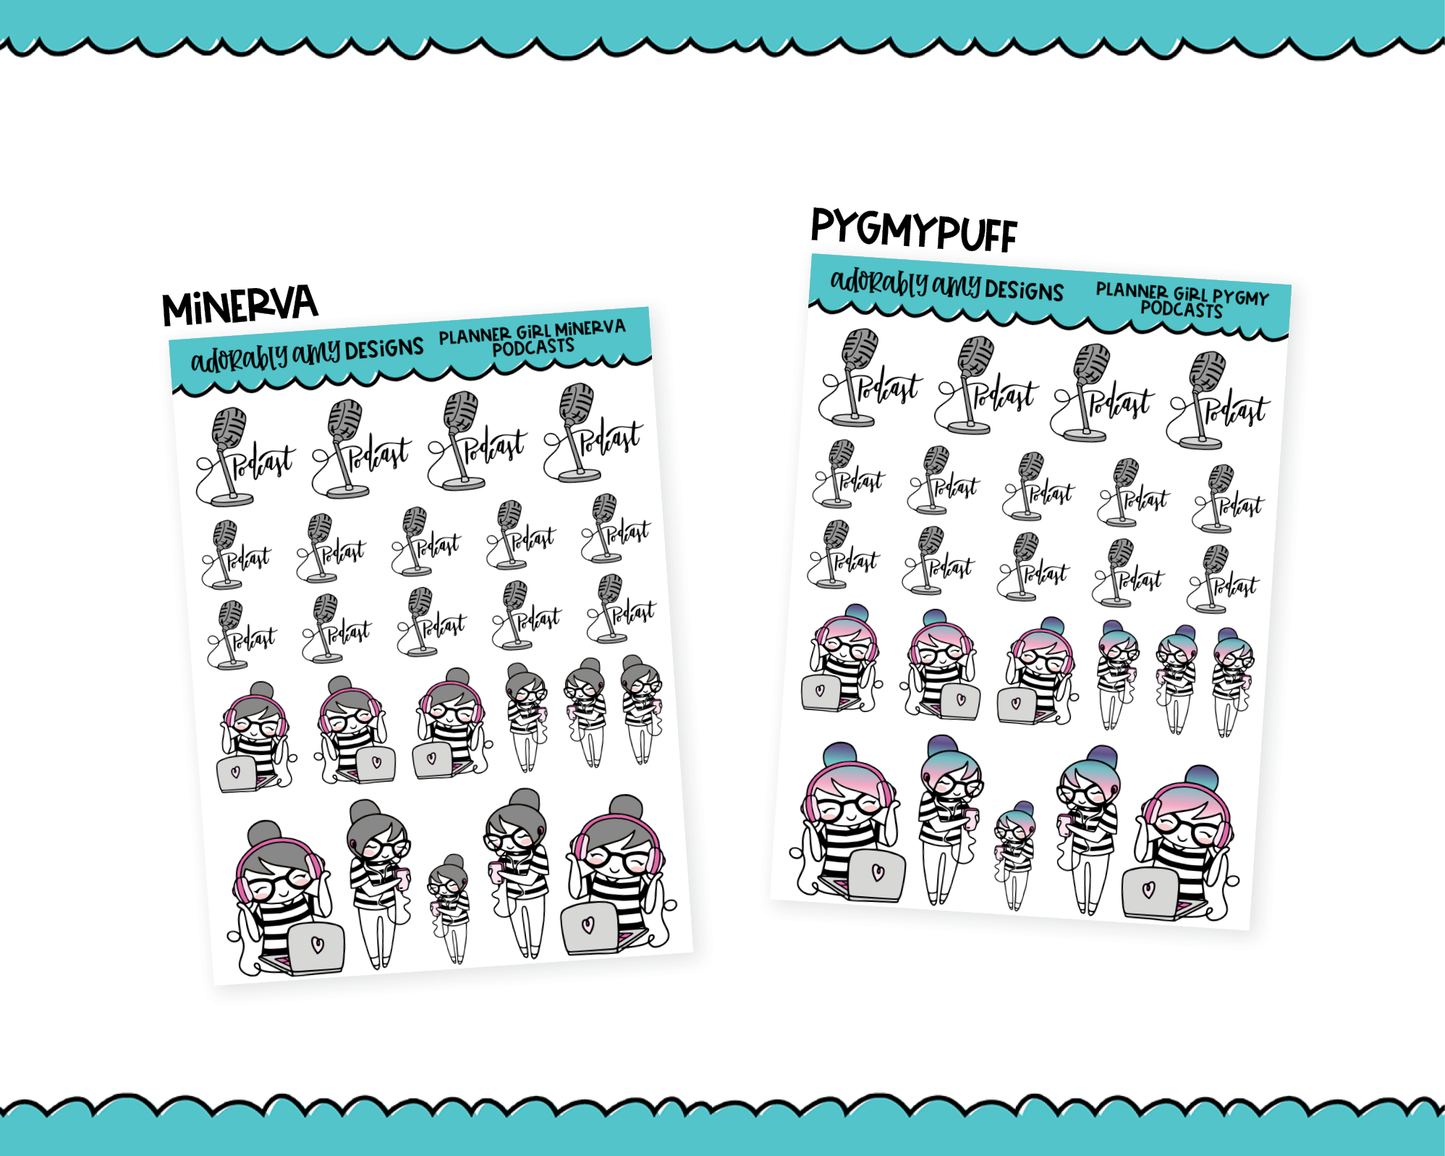 Doodled Planner Girls Character Stickers Podcasts Decorative Planner Stickers for any Planner or Insert